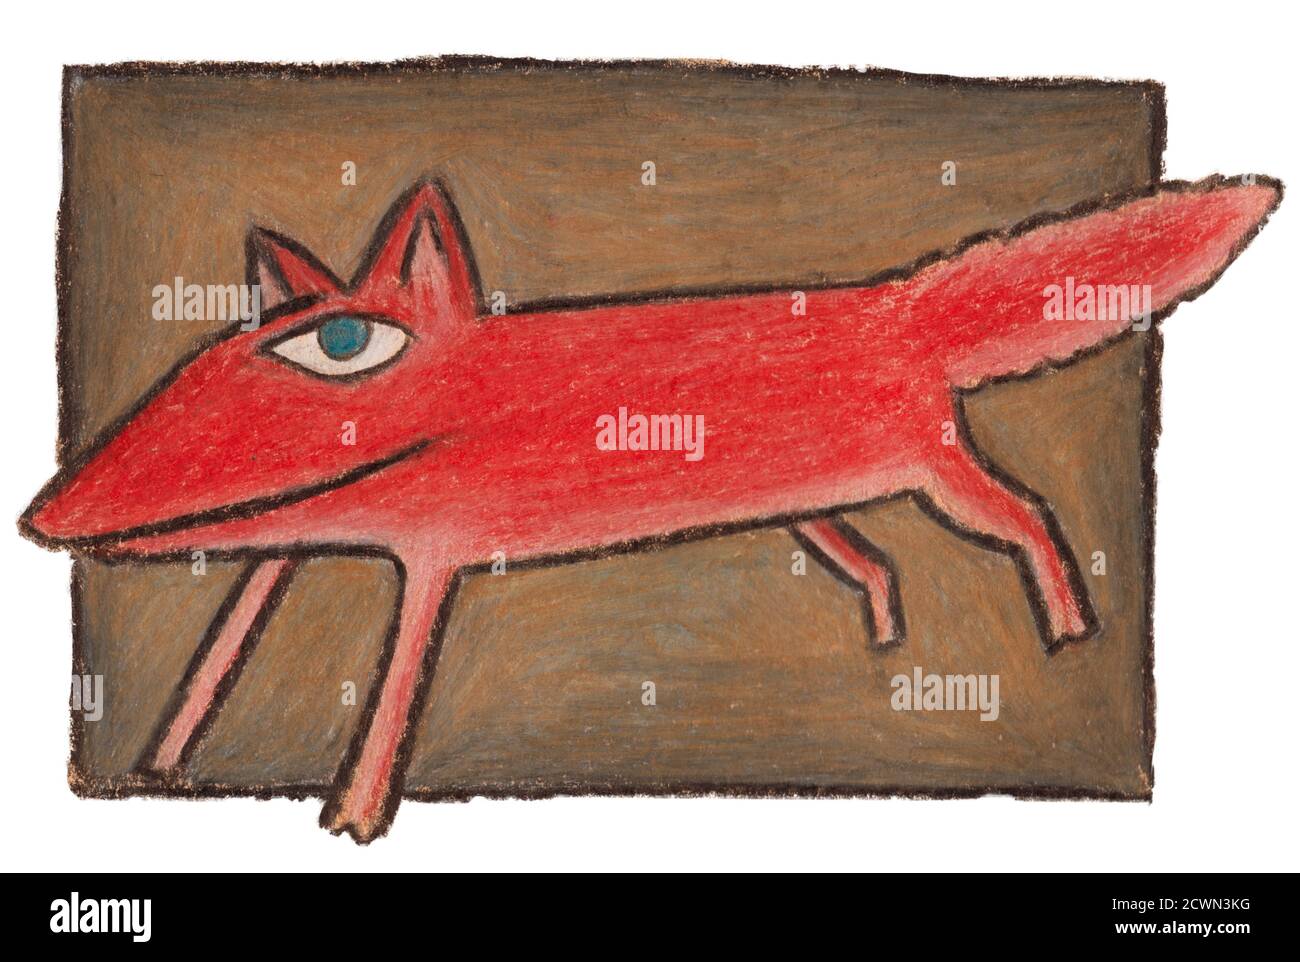 Illustration made with colored pencils of a laughing red fox. Stock Photo